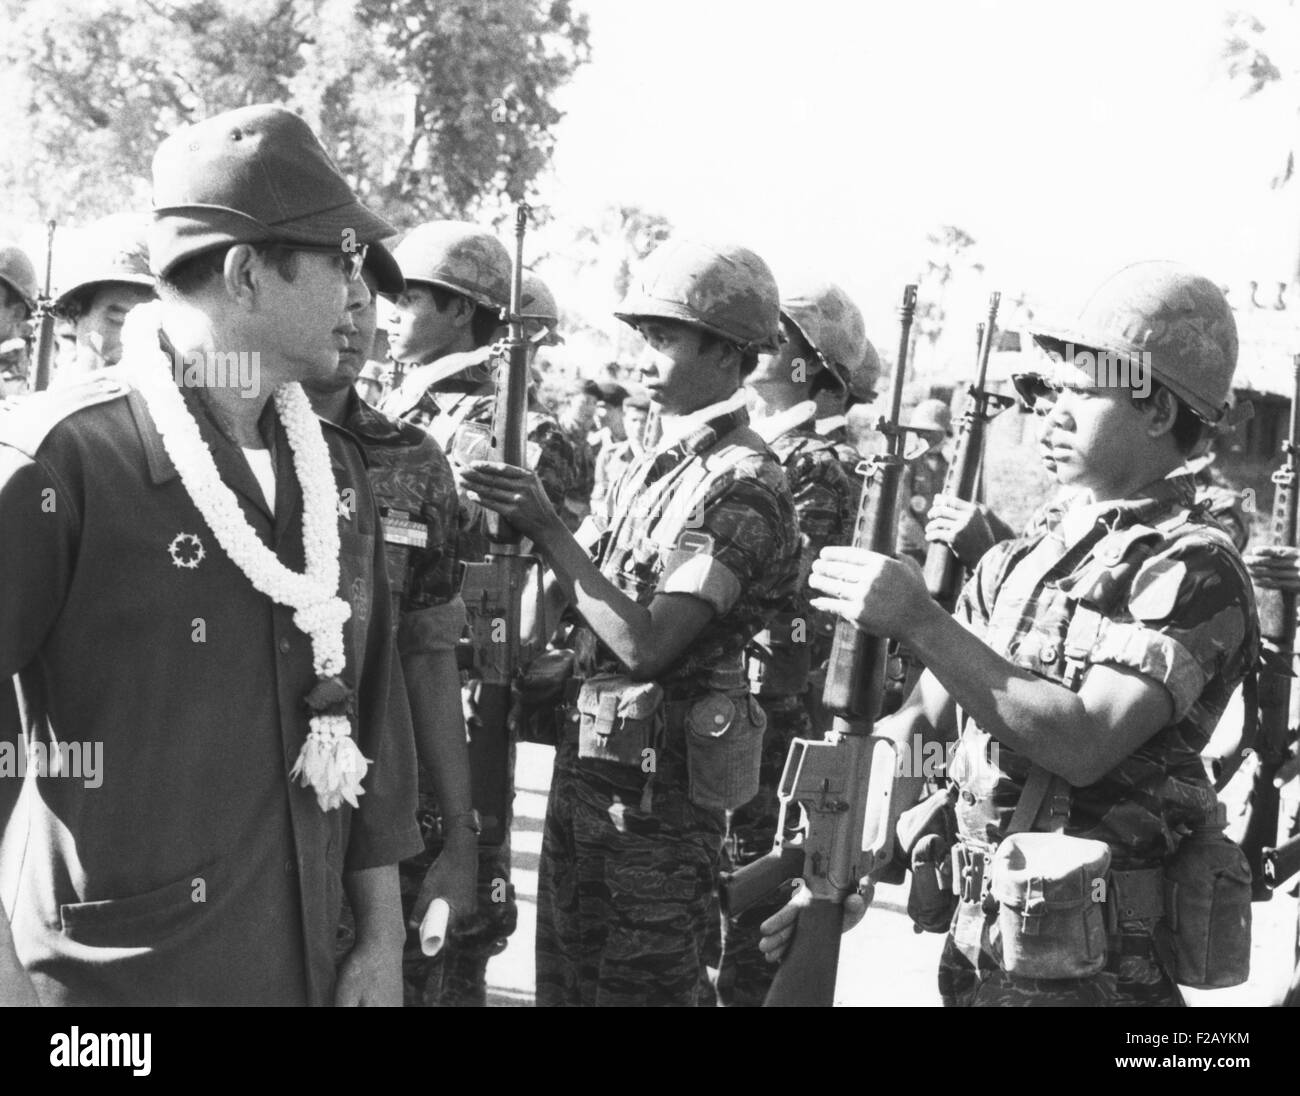 Cambodia's President Lon Nol reviews government troops on Nov. 28, 1973. Lon Nol's government was dependent on U.S. aid and Khmer Rouge insurgents were taking over large sections of the country. (CSU 2015 9 766) Stock Photo